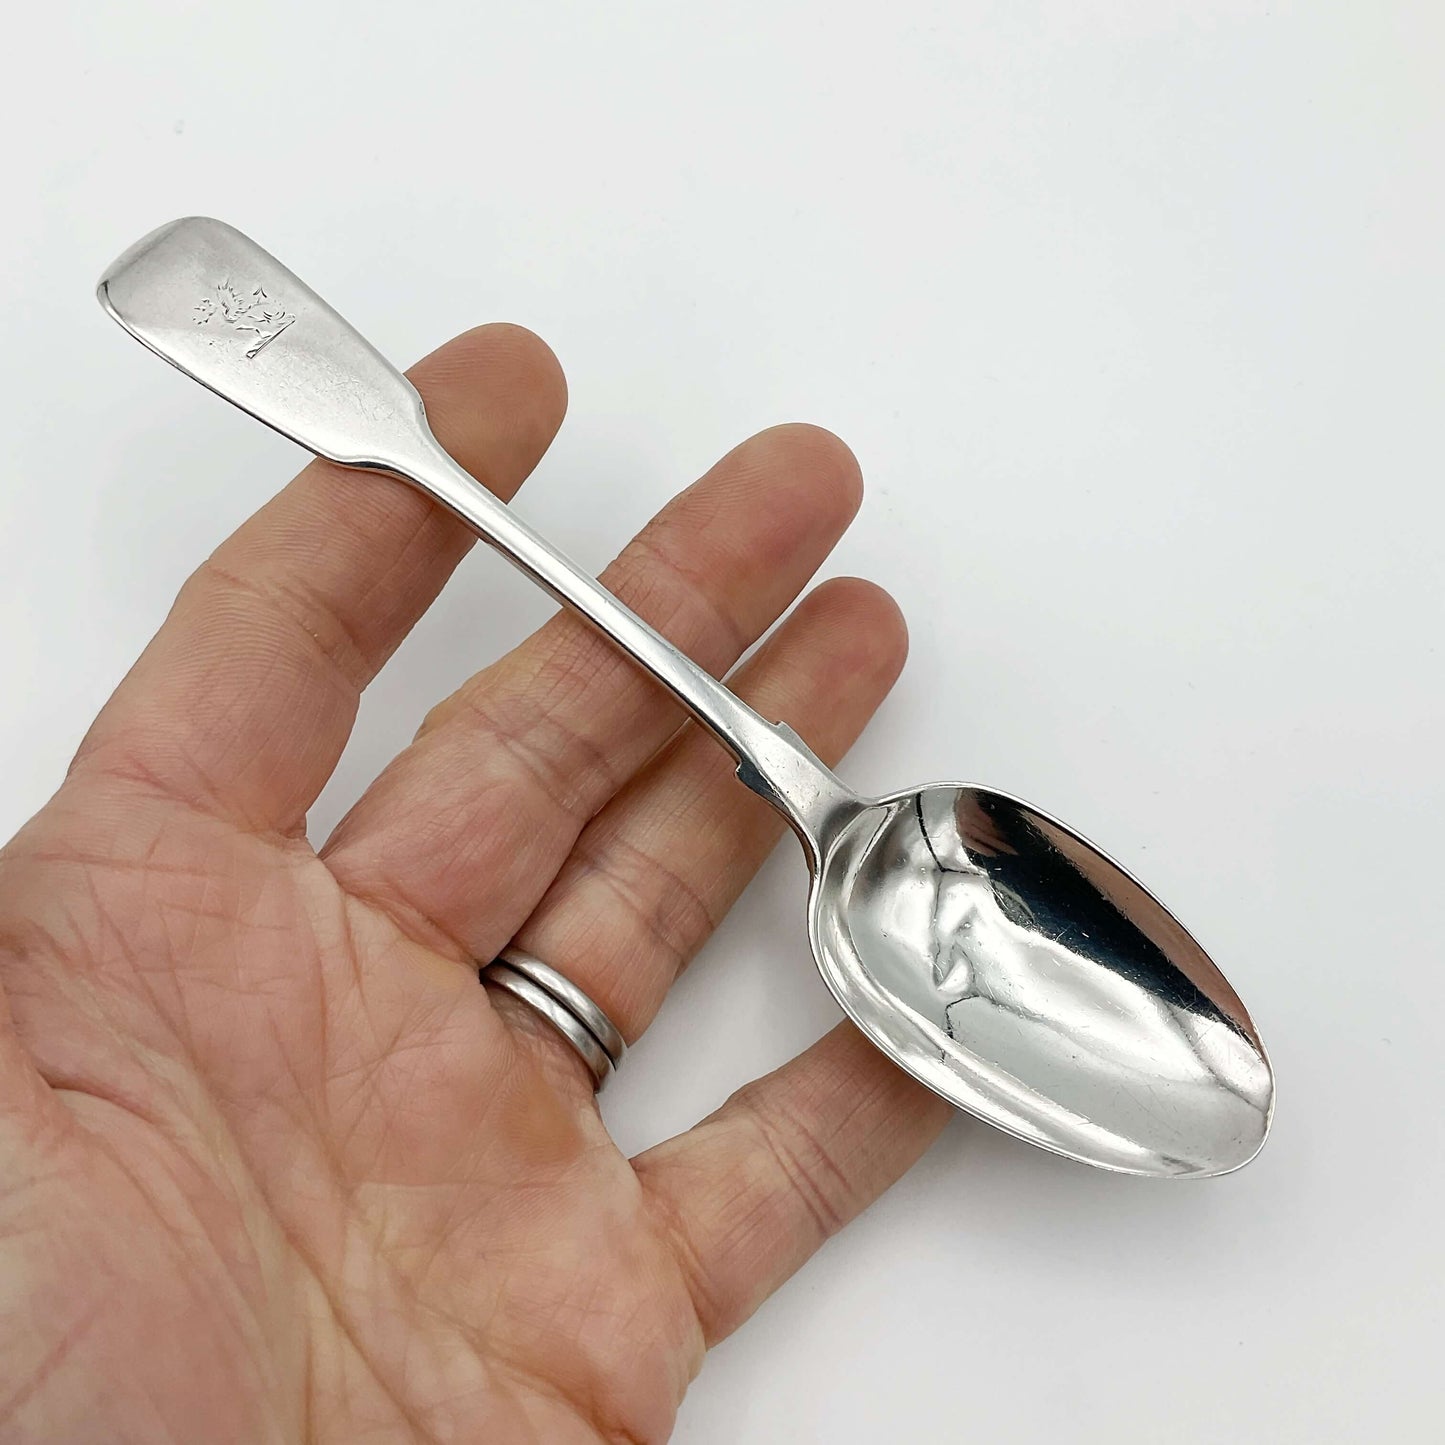 Antique Silver Teaspoon held in a hand